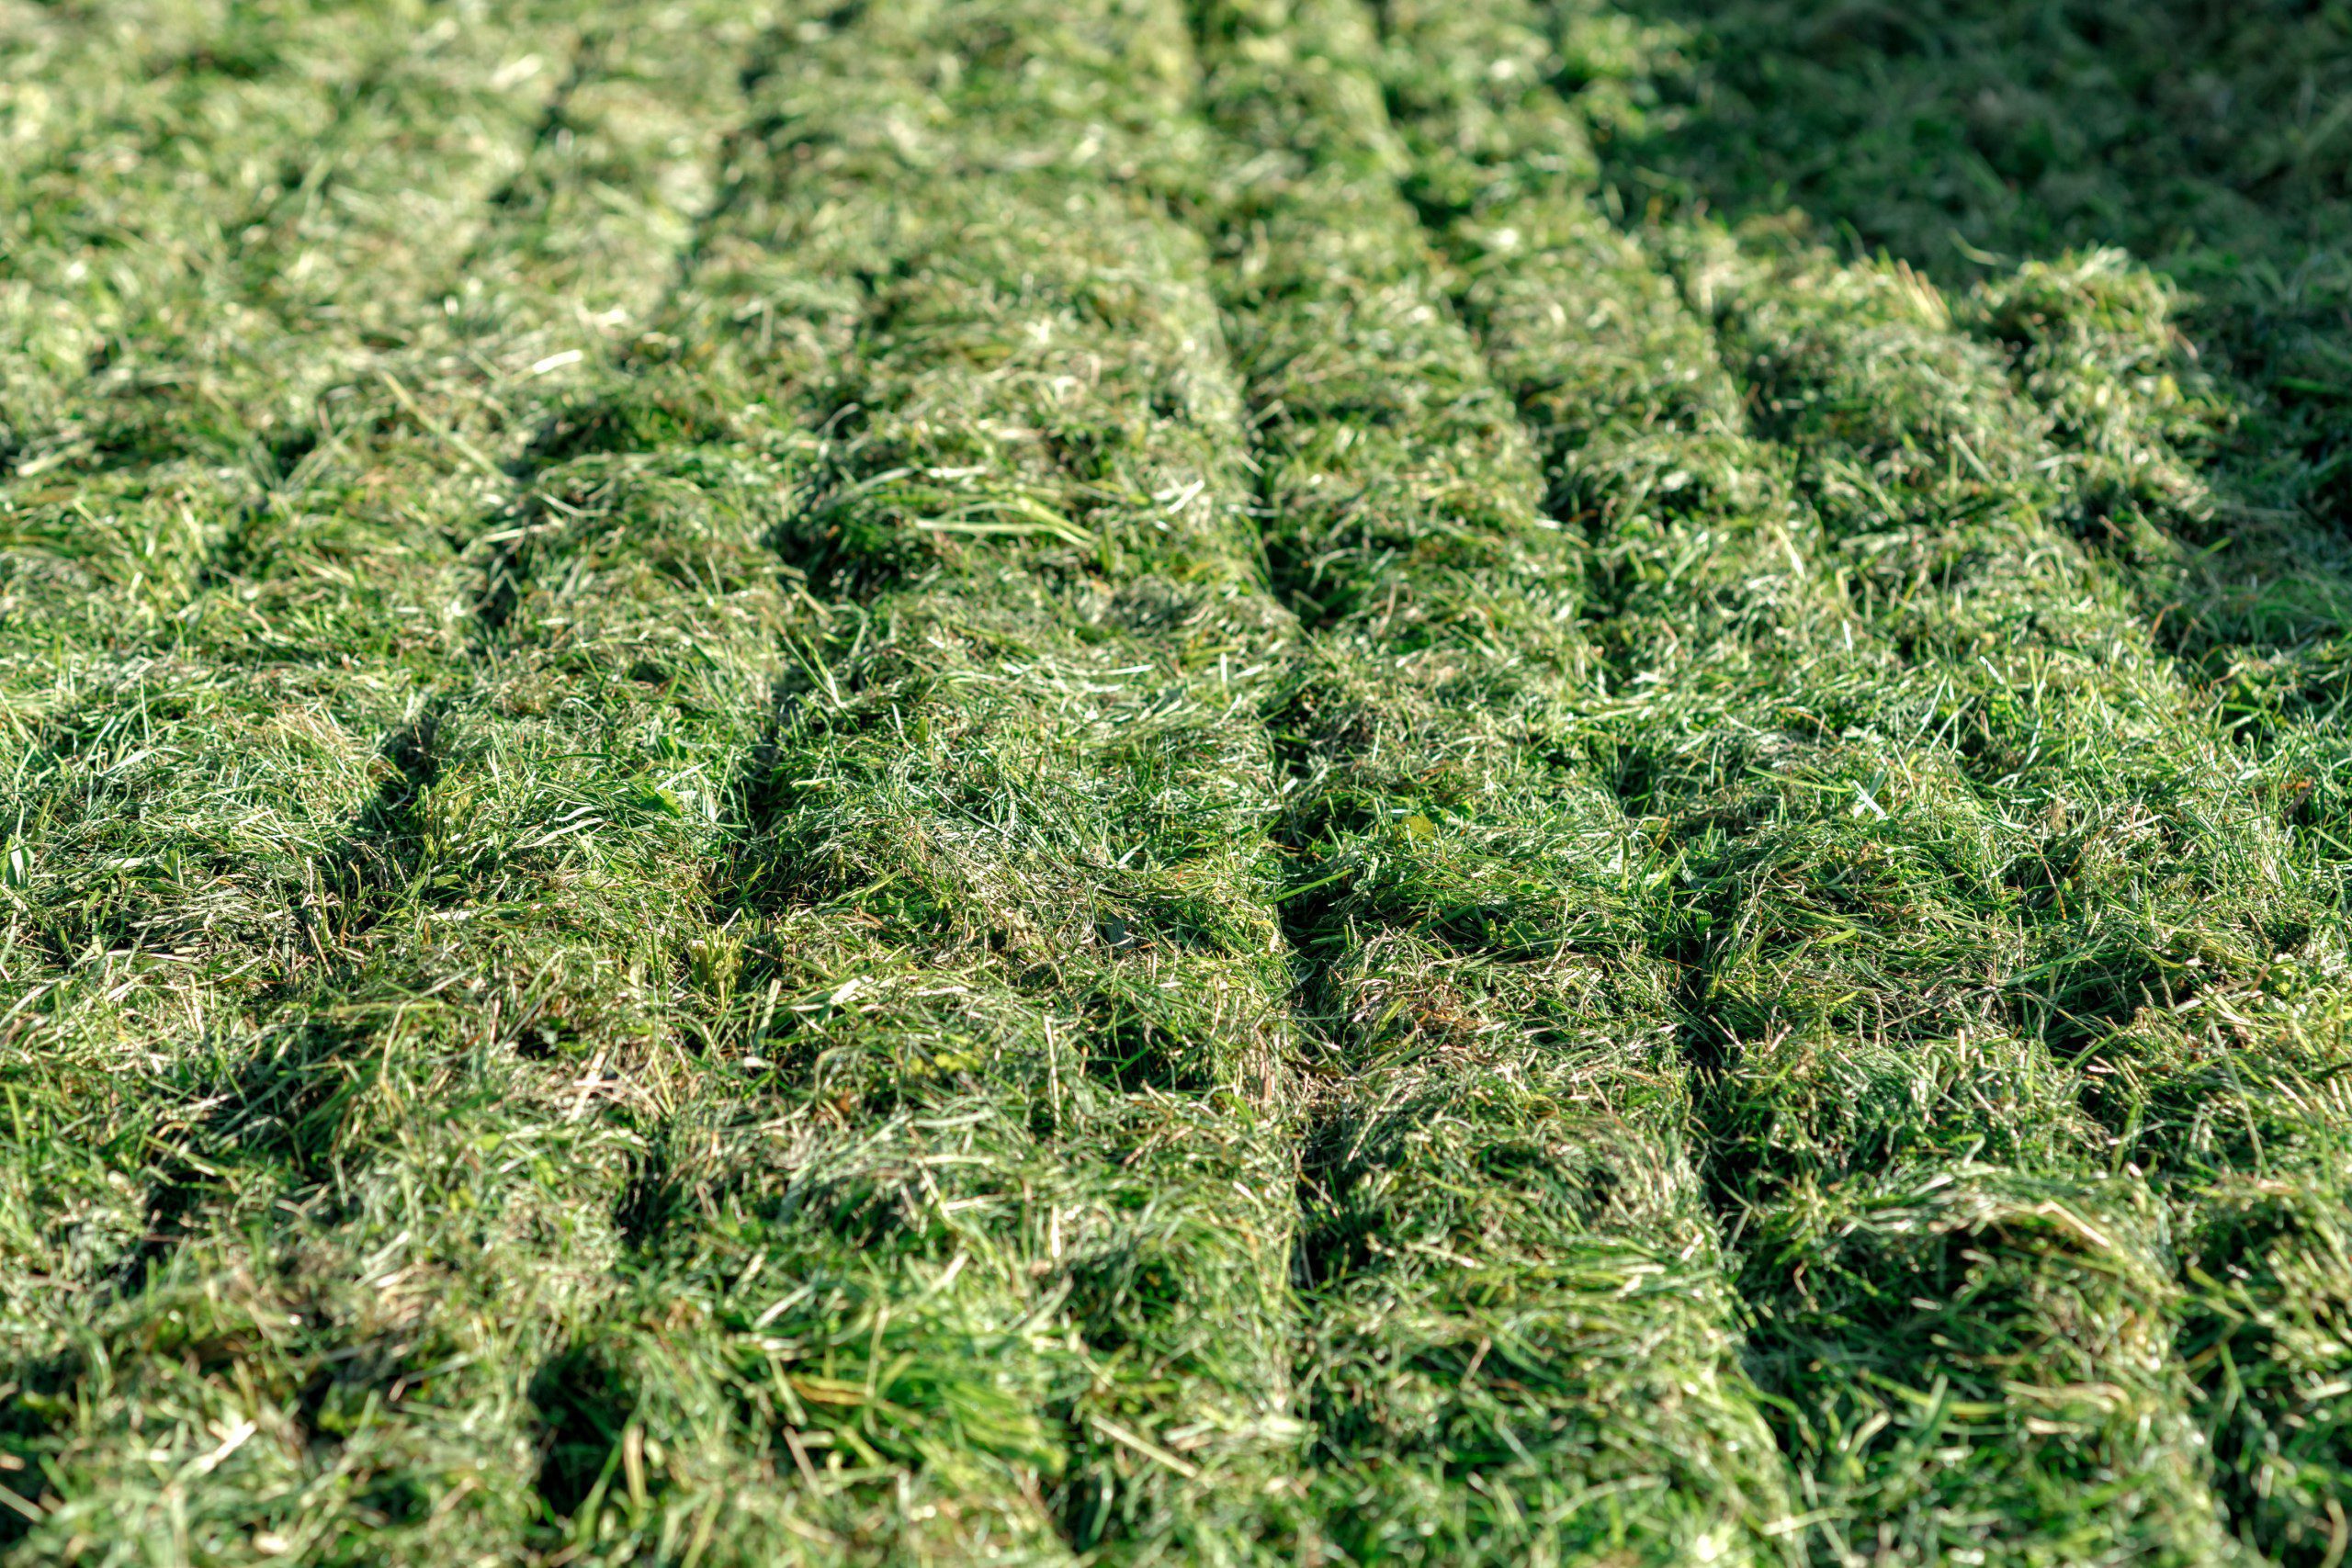 Result: perfectly compacted grass silage